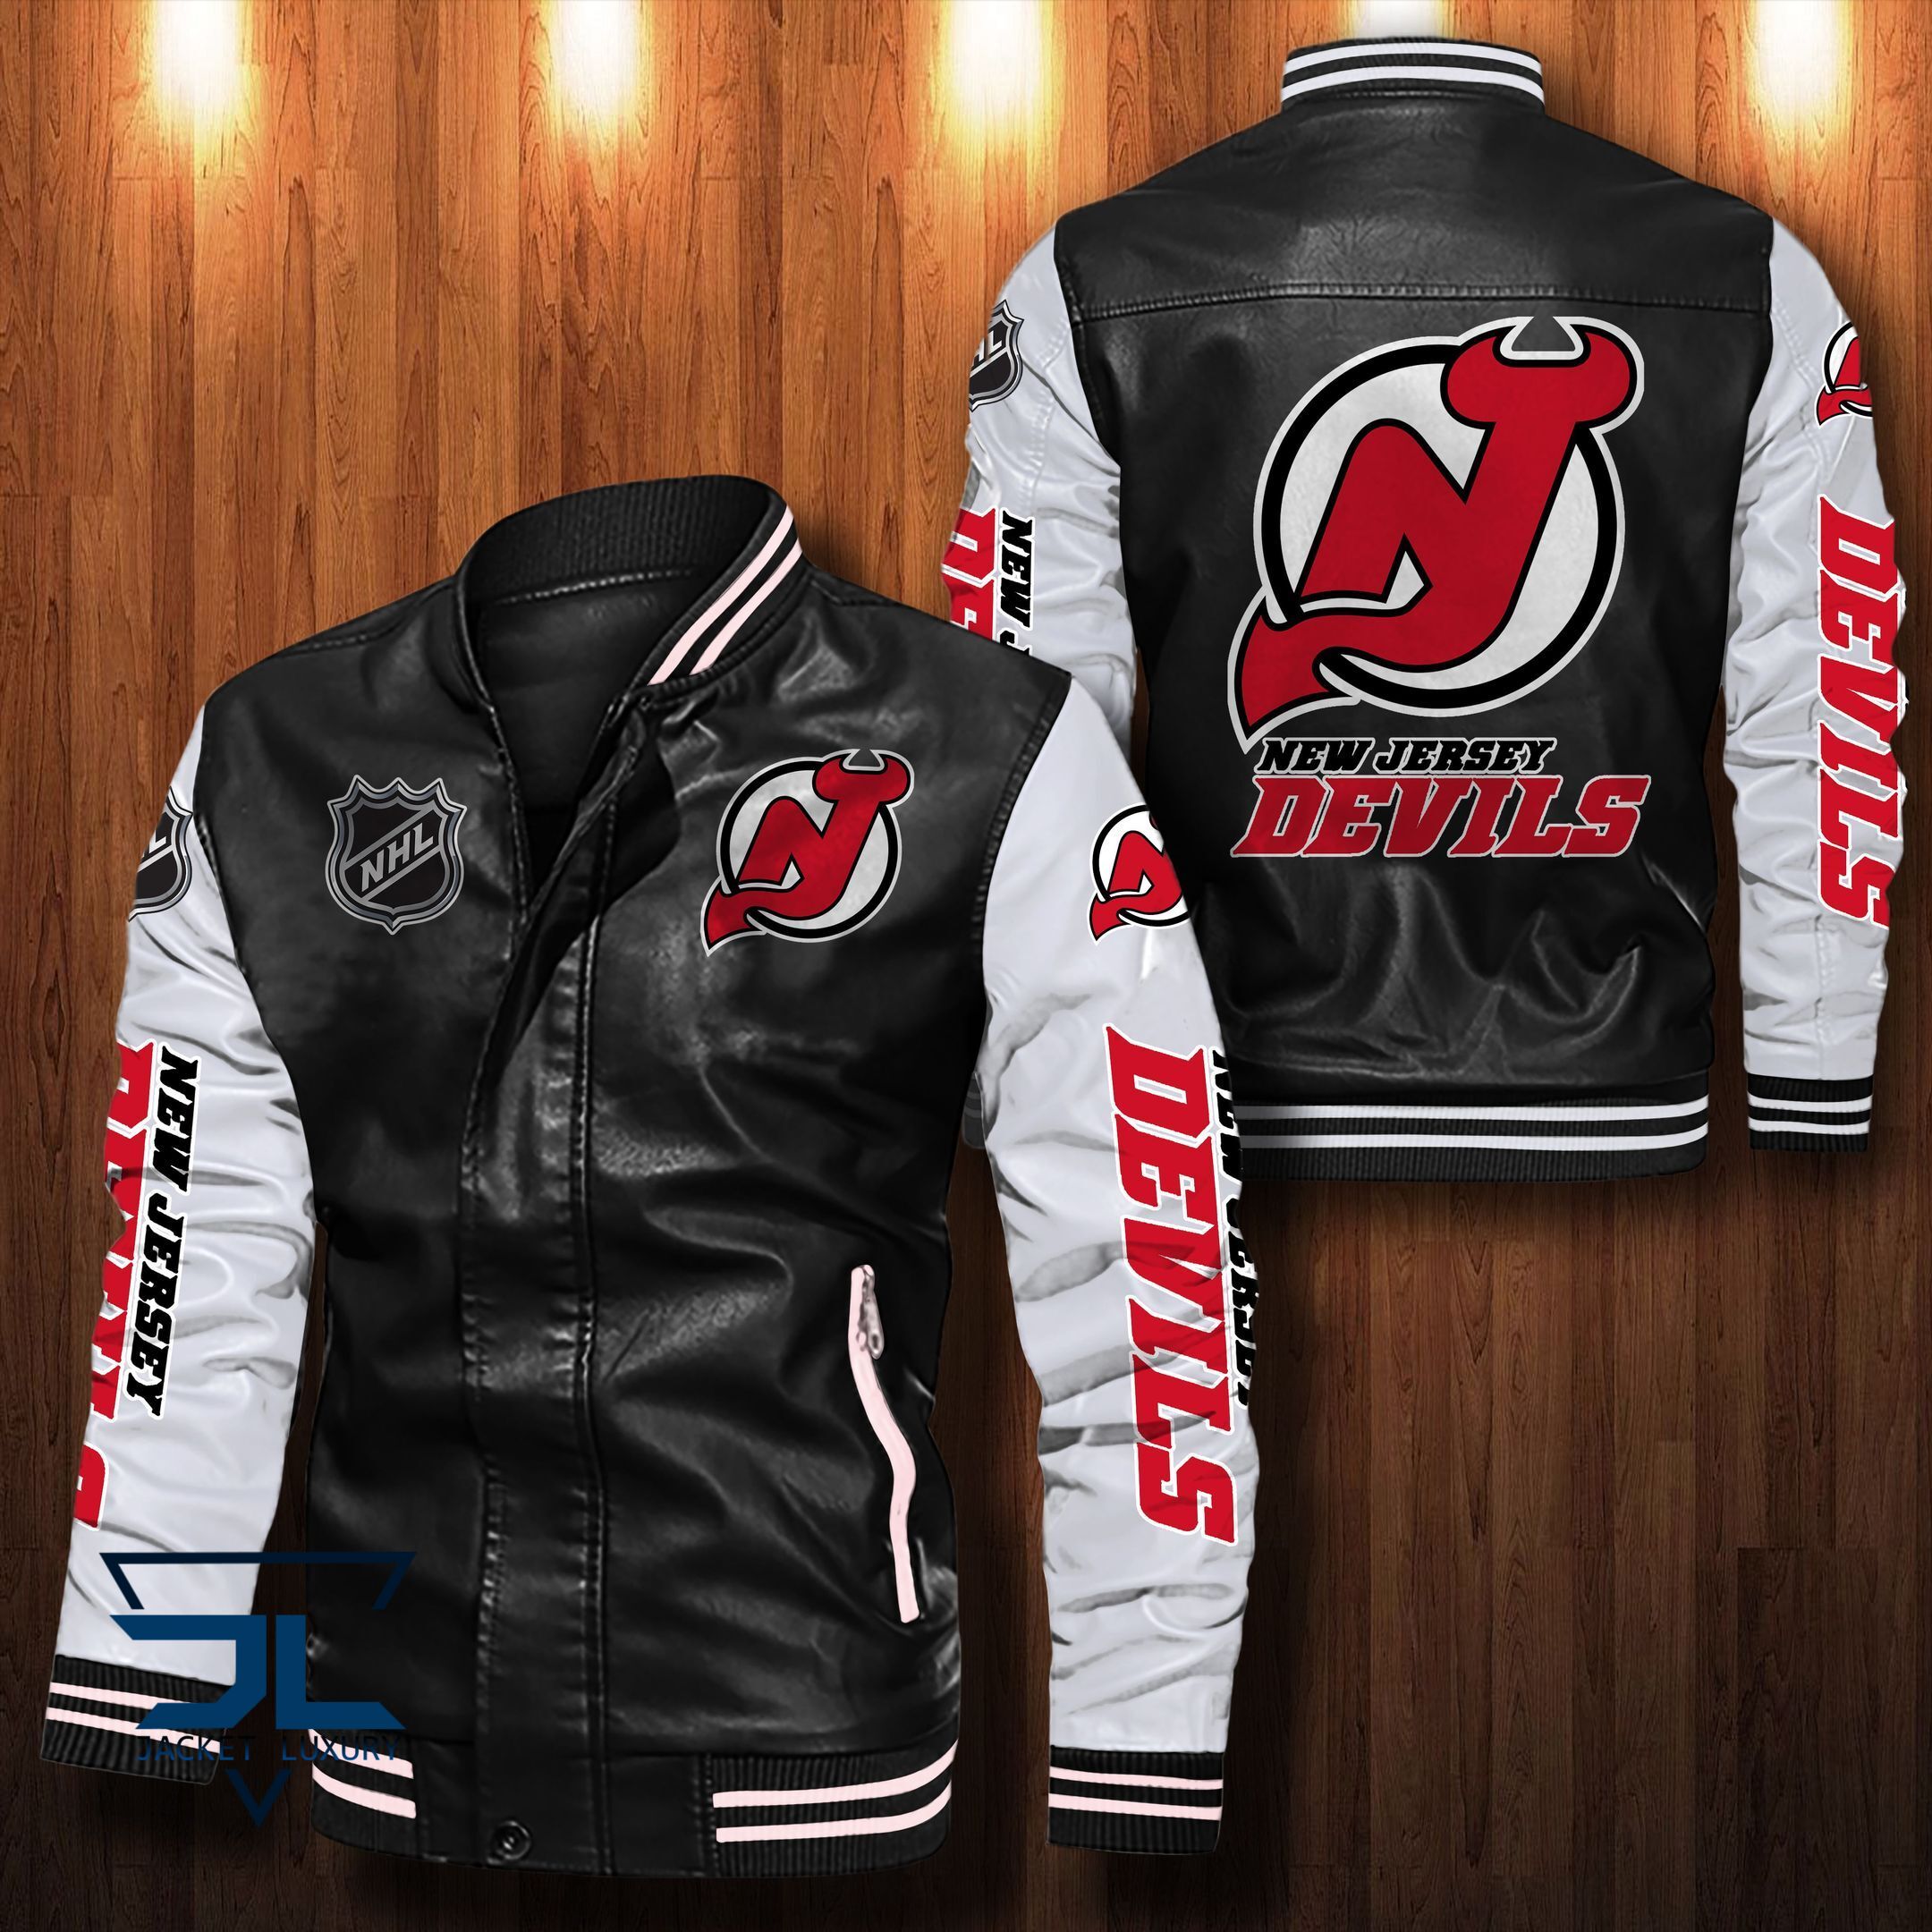 HOT Jacket only $69,99 so don't miss out - Be sure to pick up yours today! 129